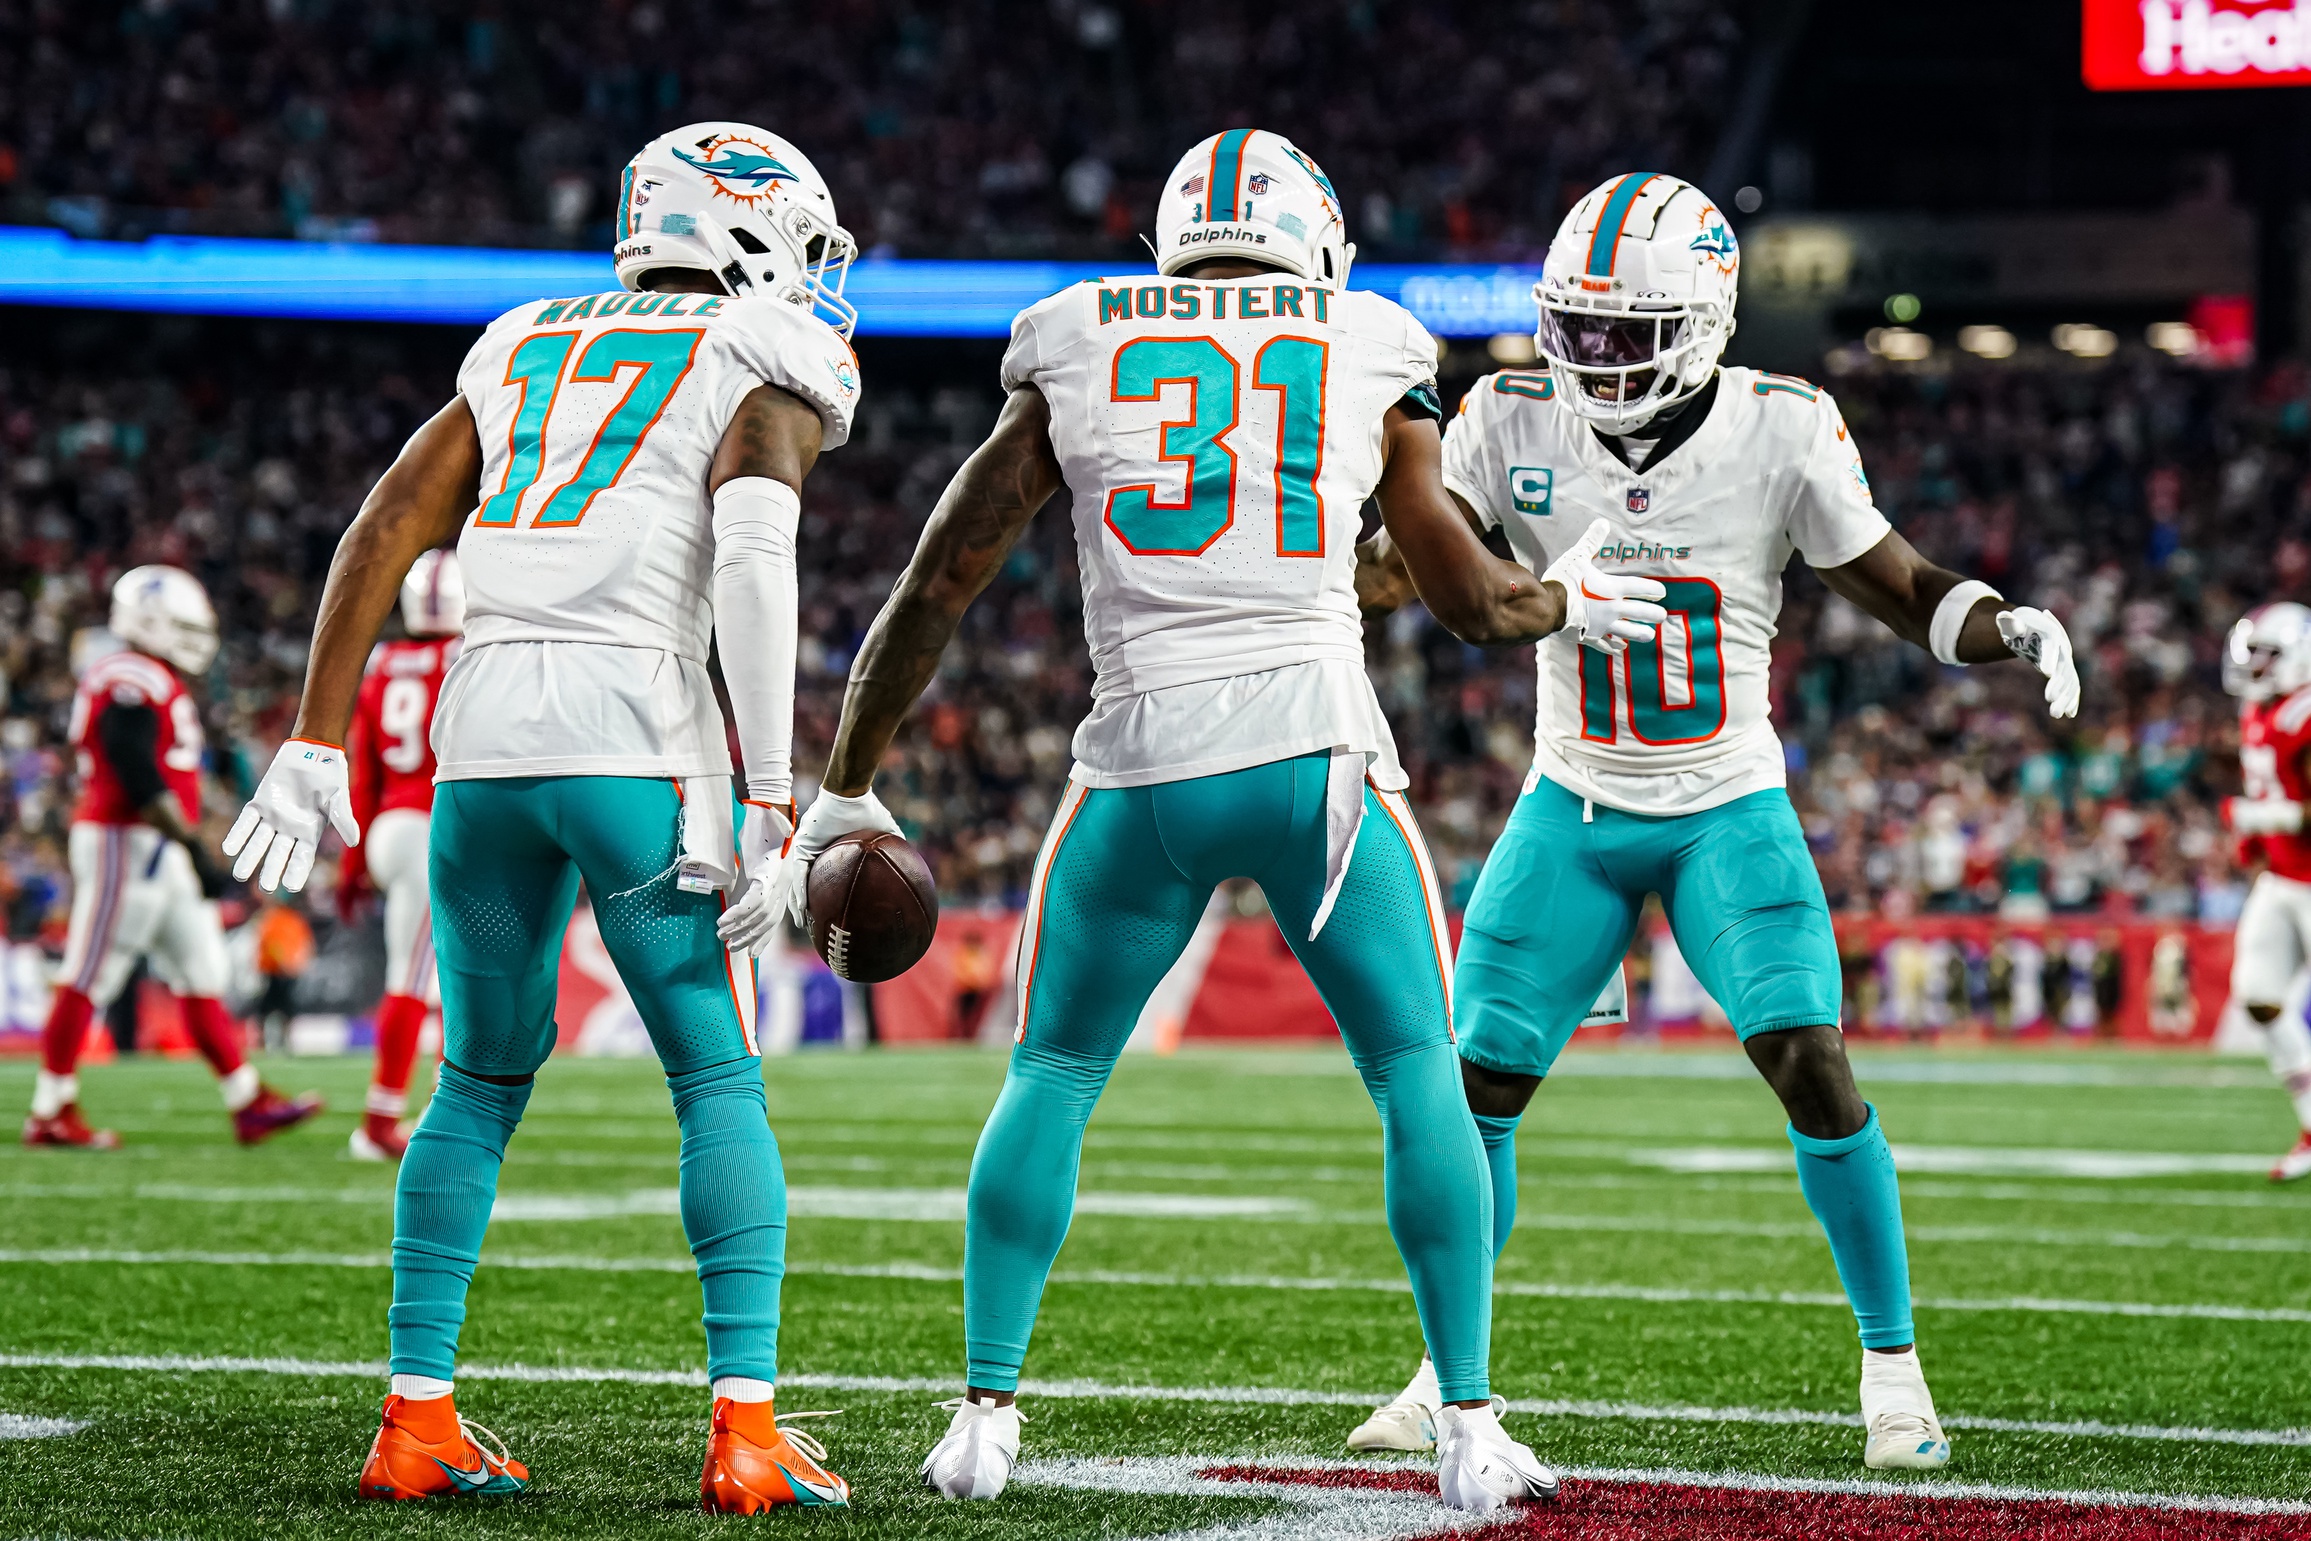 What are reactions around the NFL following the Miami Dolphins' loss to the  Buffalo Bills?